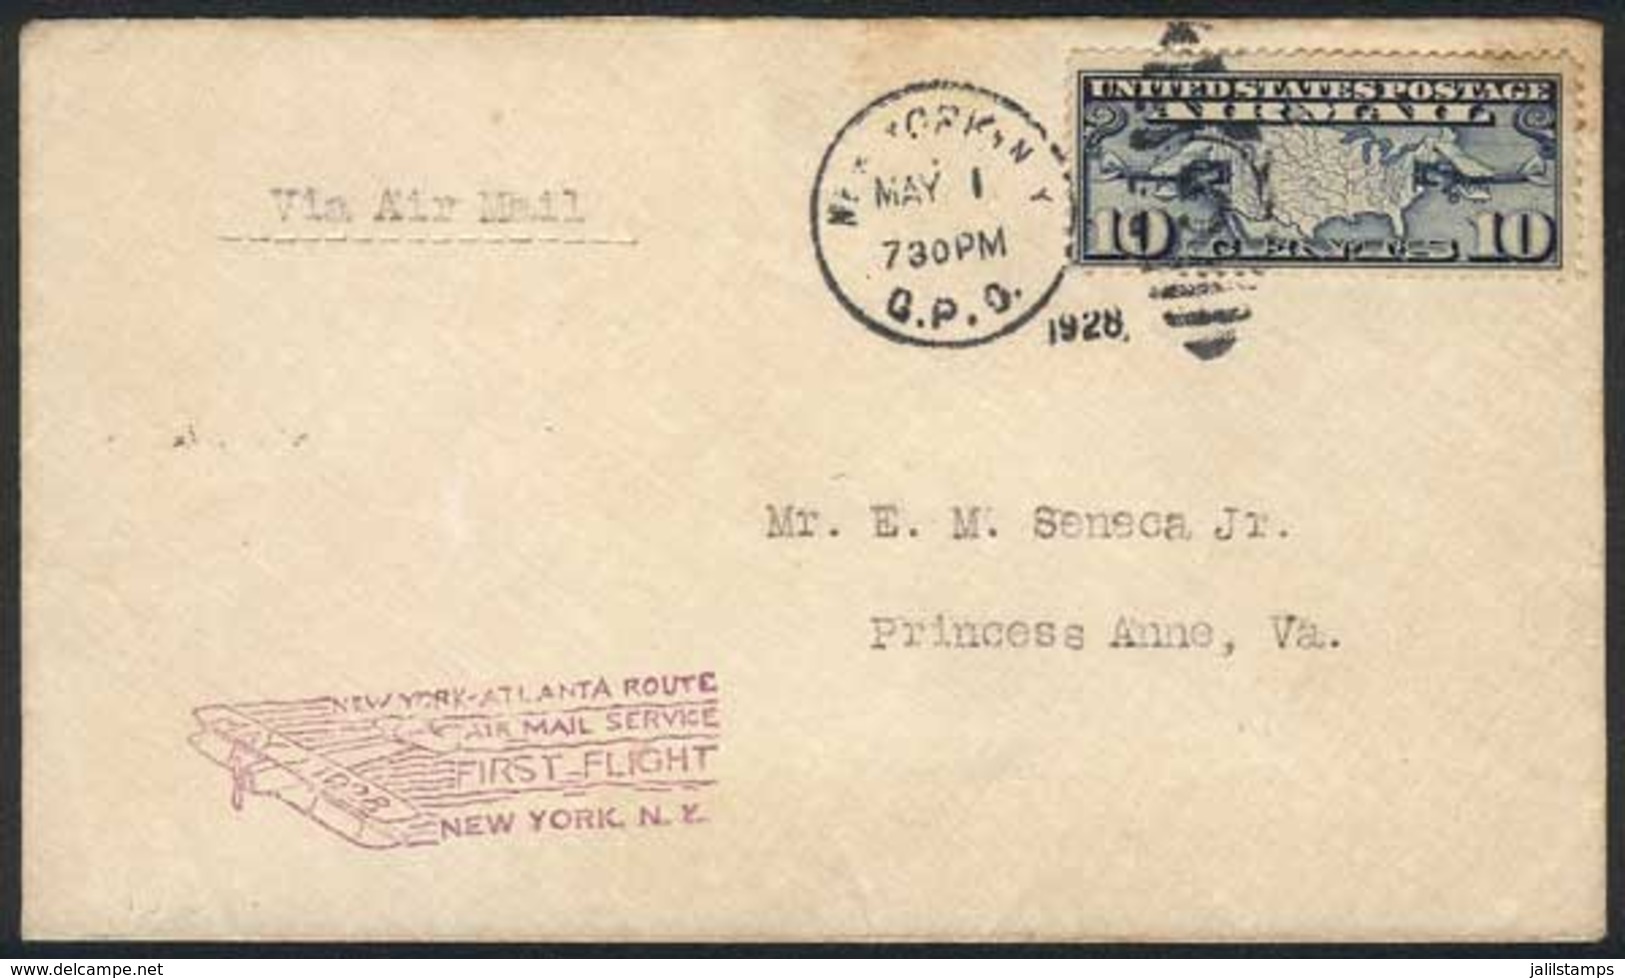 UNITED STATES: 1/MAY/1928 New York-Atlanta Route First Flight Cover, With Washington DC Arrival Backstamp, VF Quality! - Poststempel